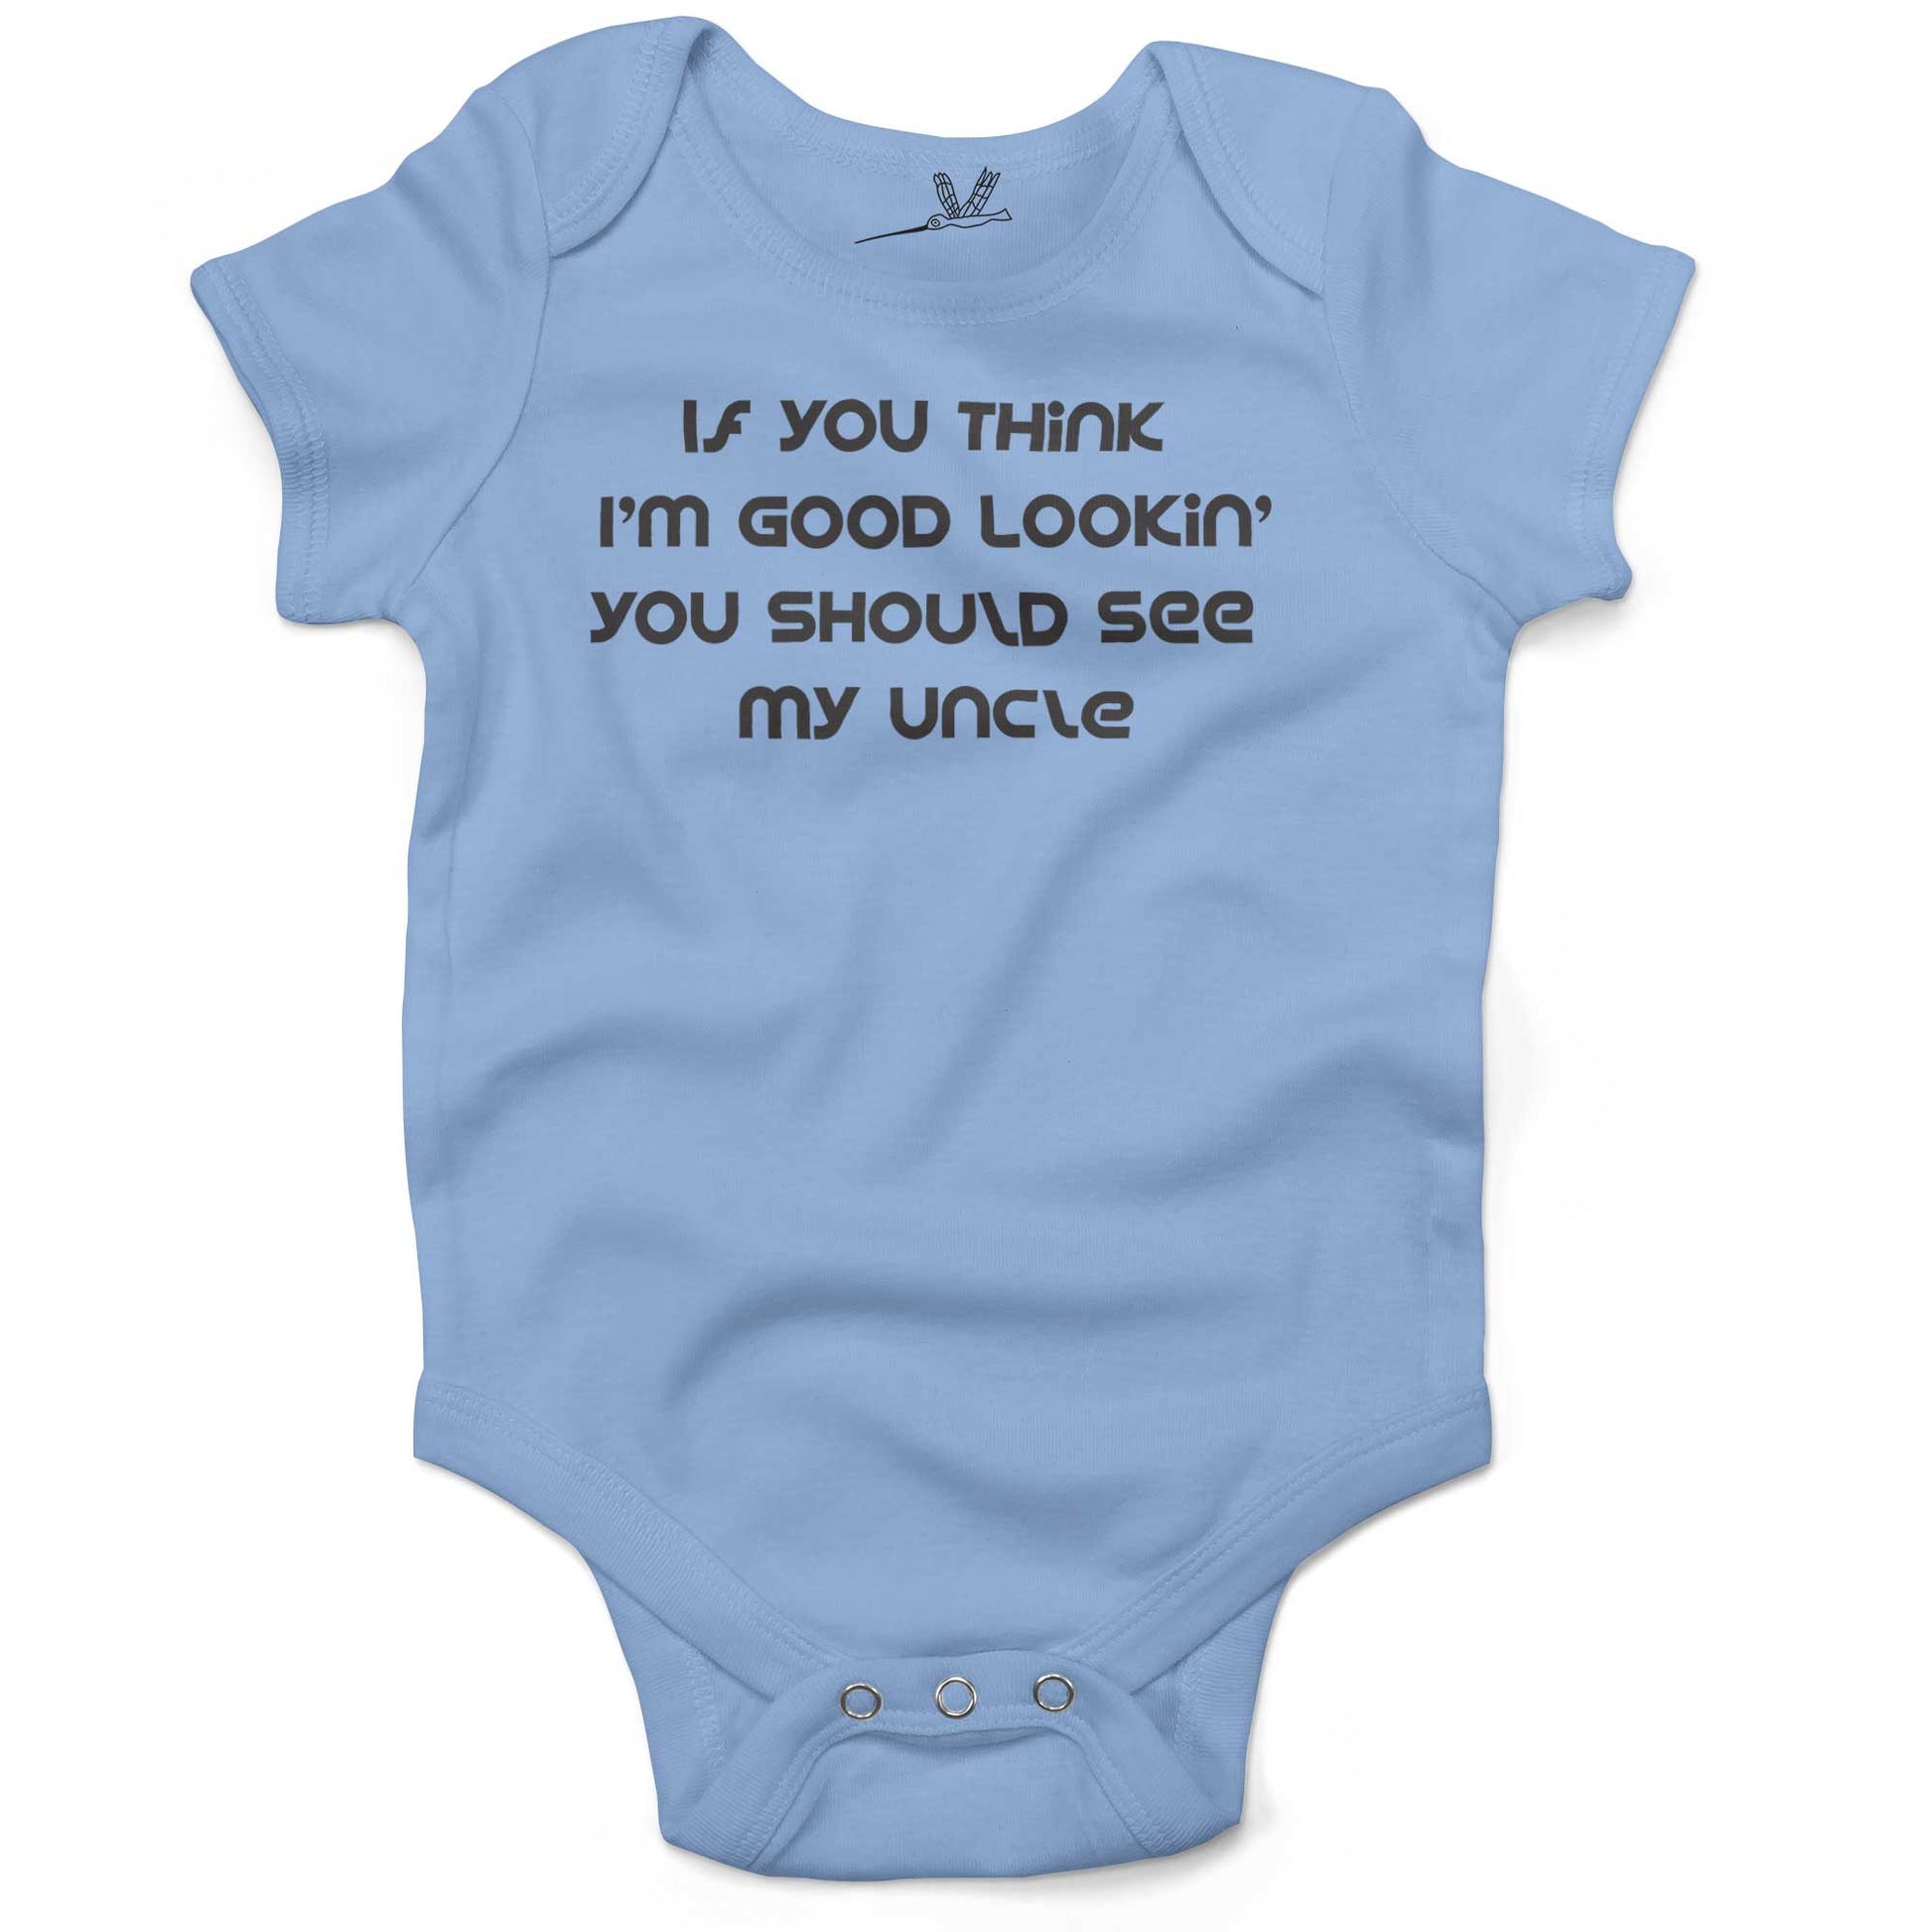 If You Think I'm Good Lookin' You Should See My Uncle Infant Bodysuit or Raglan Tee-Organic Baby Blue-3-6 months